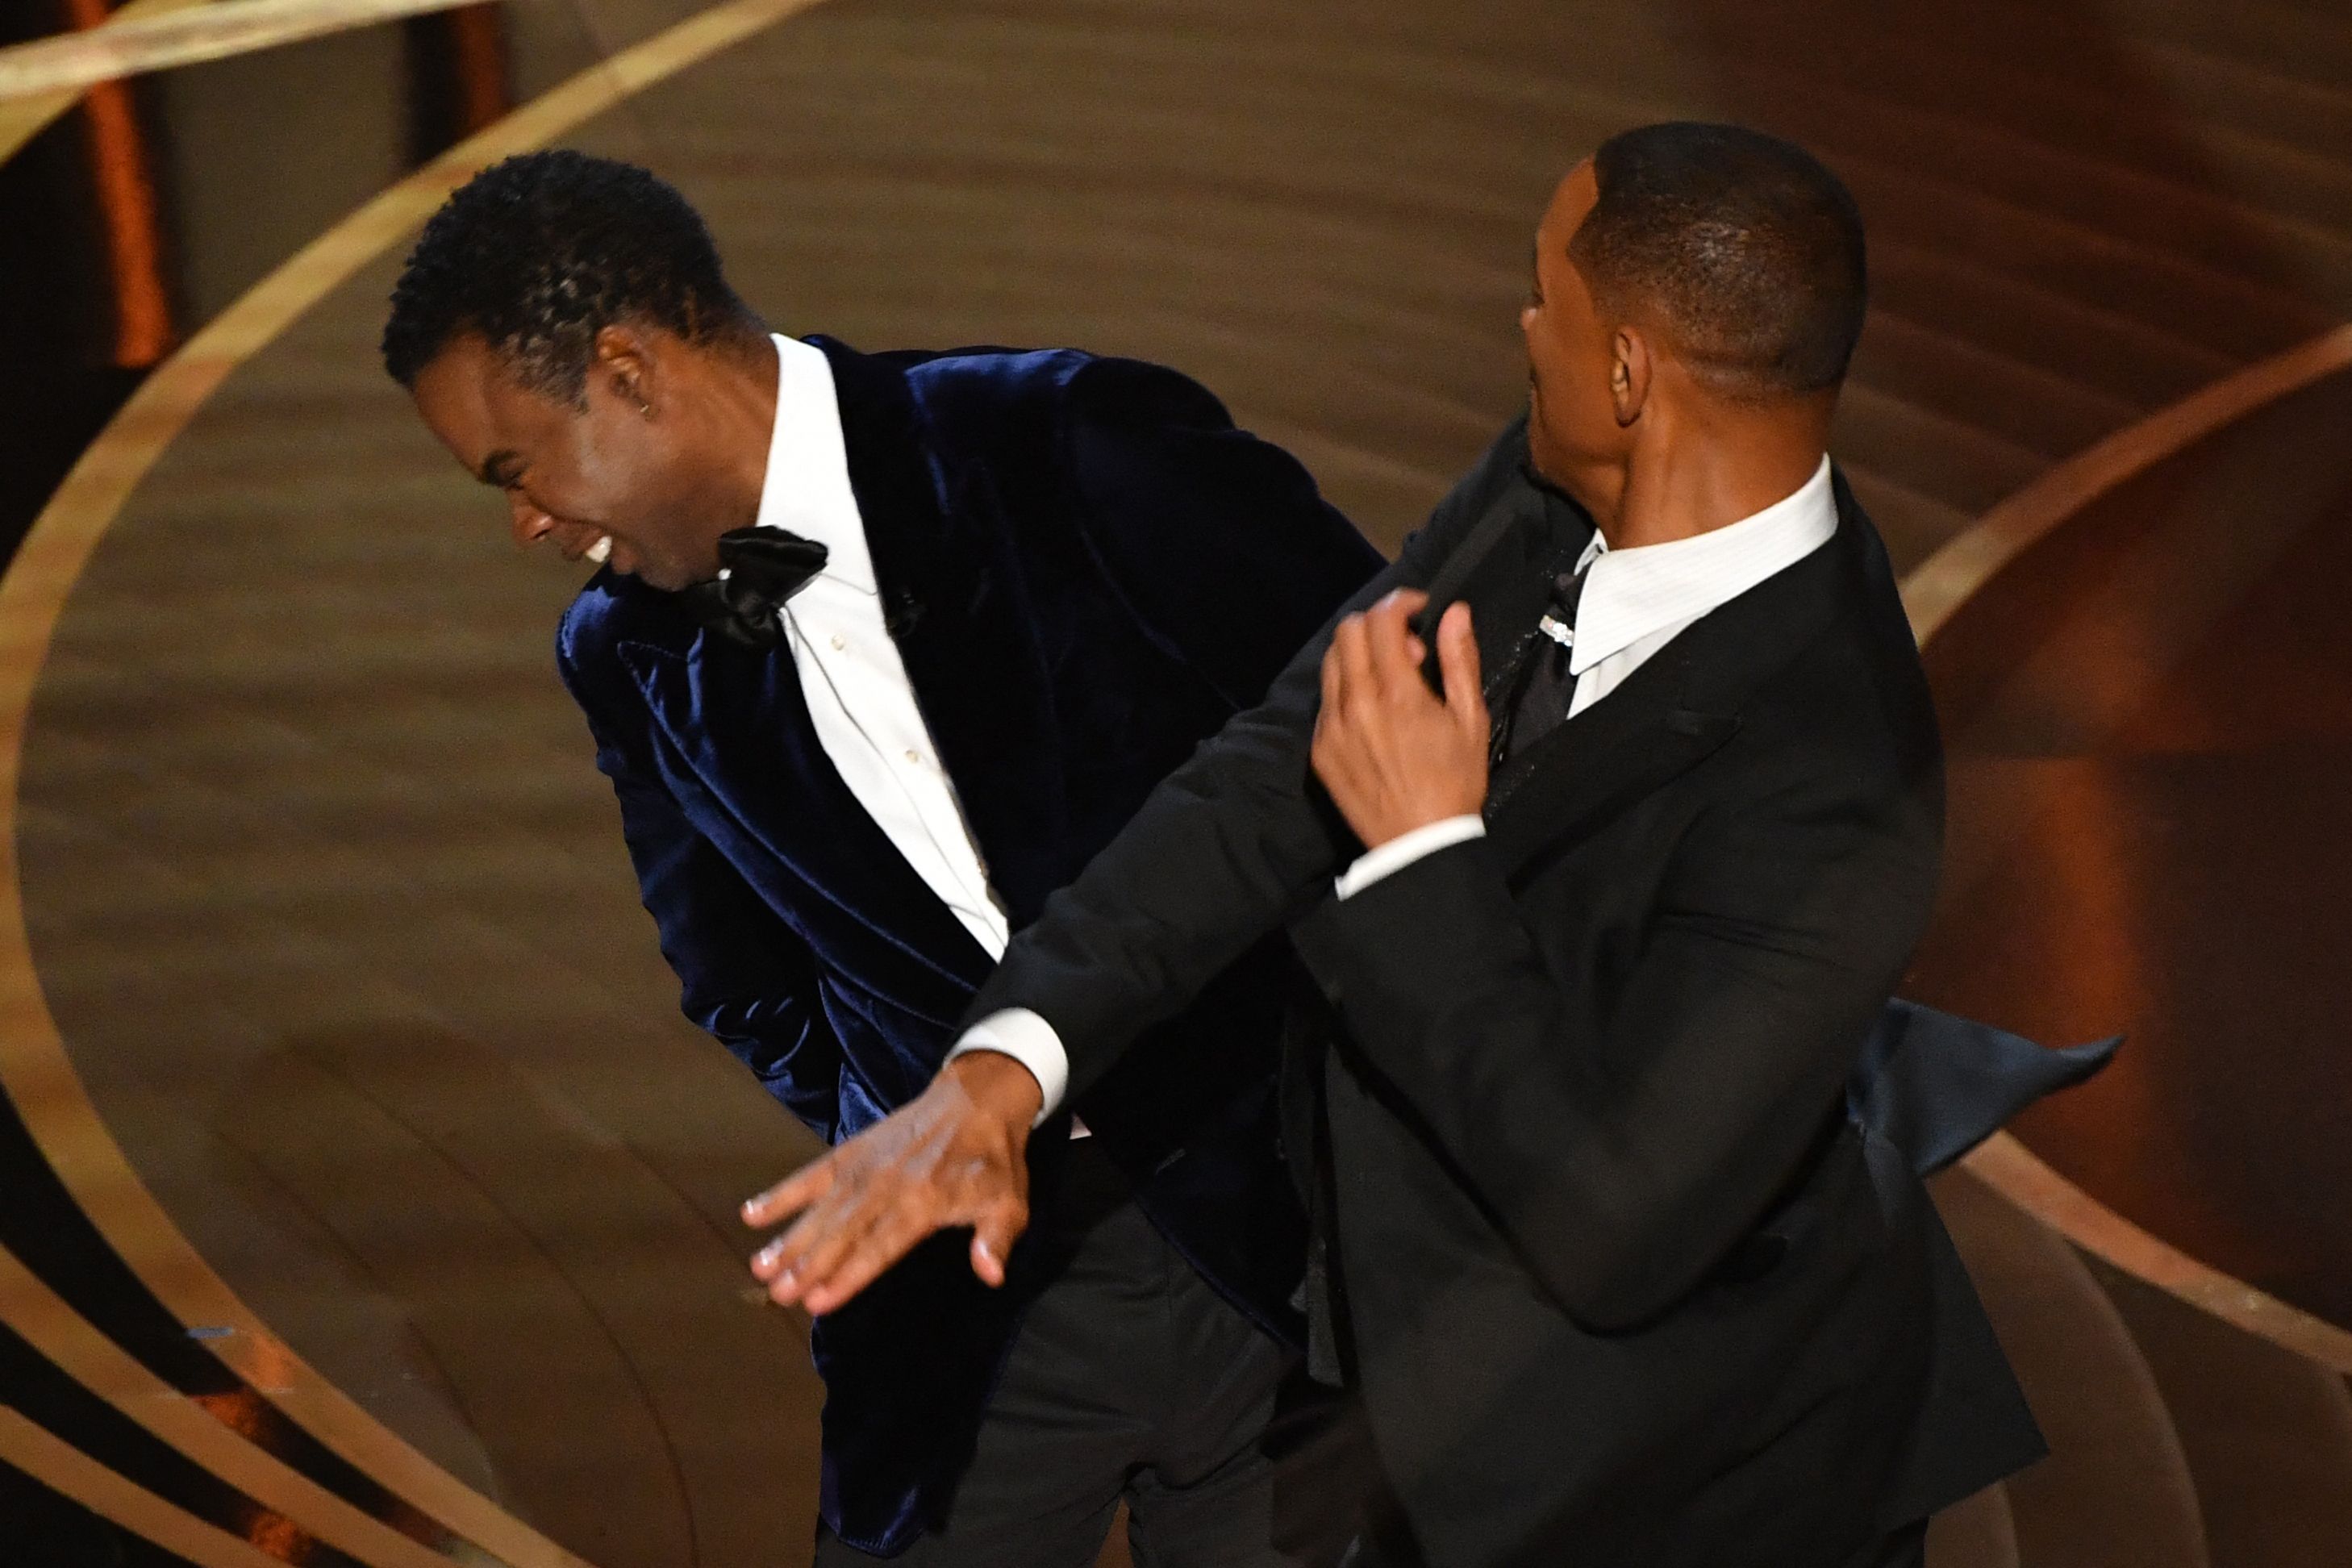 The mom of two's alopecia was brought to everyone's attention at the 2022 Oscars when host Chris Rock made a controversial joke about her bald head.